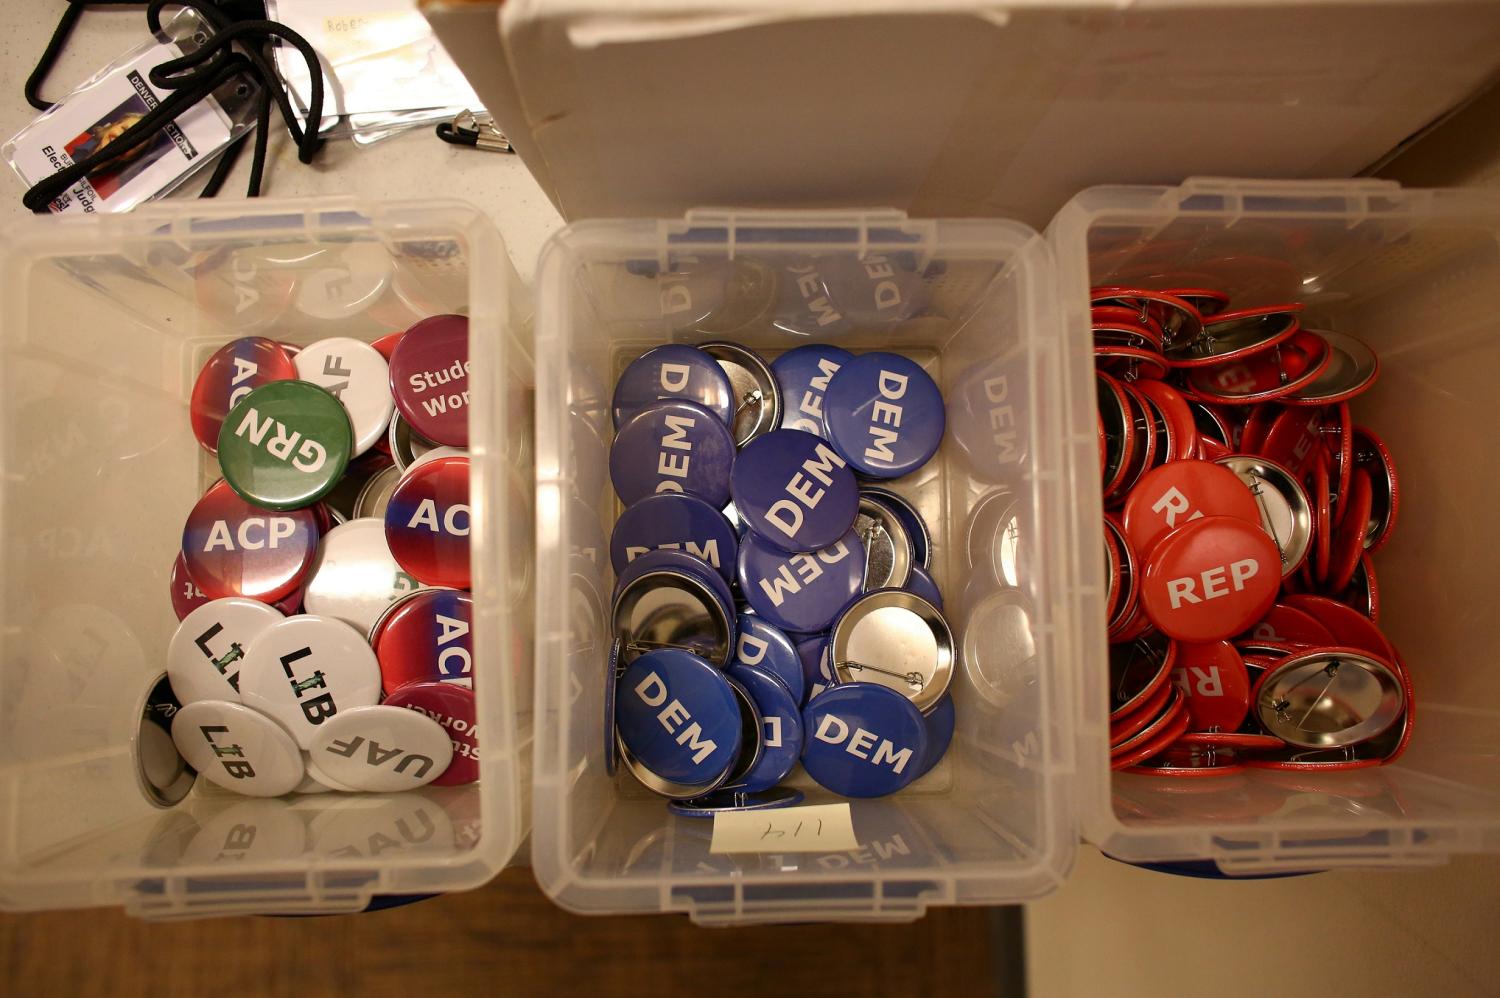 Election officials in Denver are required to wear buttons indicating their party officiation or if they are unaffiliated while processing and counting ballots for the upcoming presidential election in Colorado, U.S., October 22, 2020.  REUTERS/Kevin Mohatt